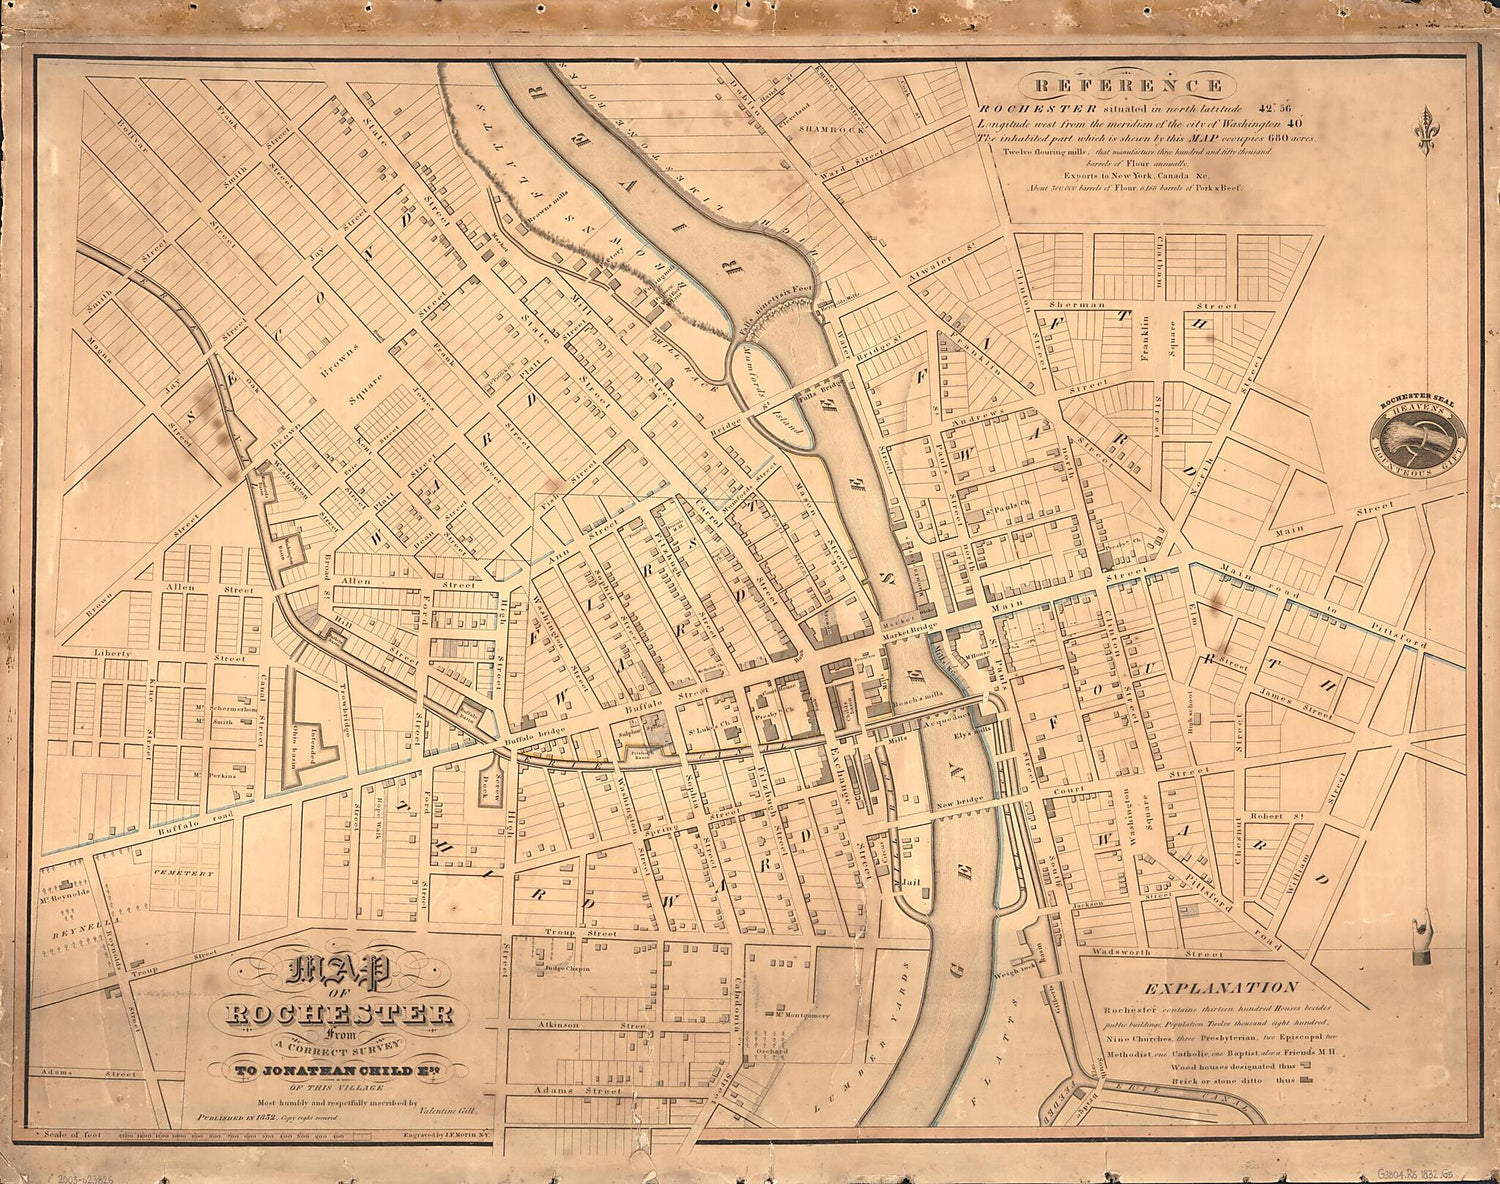 This old map of Map of Rochester from a Correct Survey from 1832 was created by Jonathan Child, Valentine Gill, John F. Morin in 1832